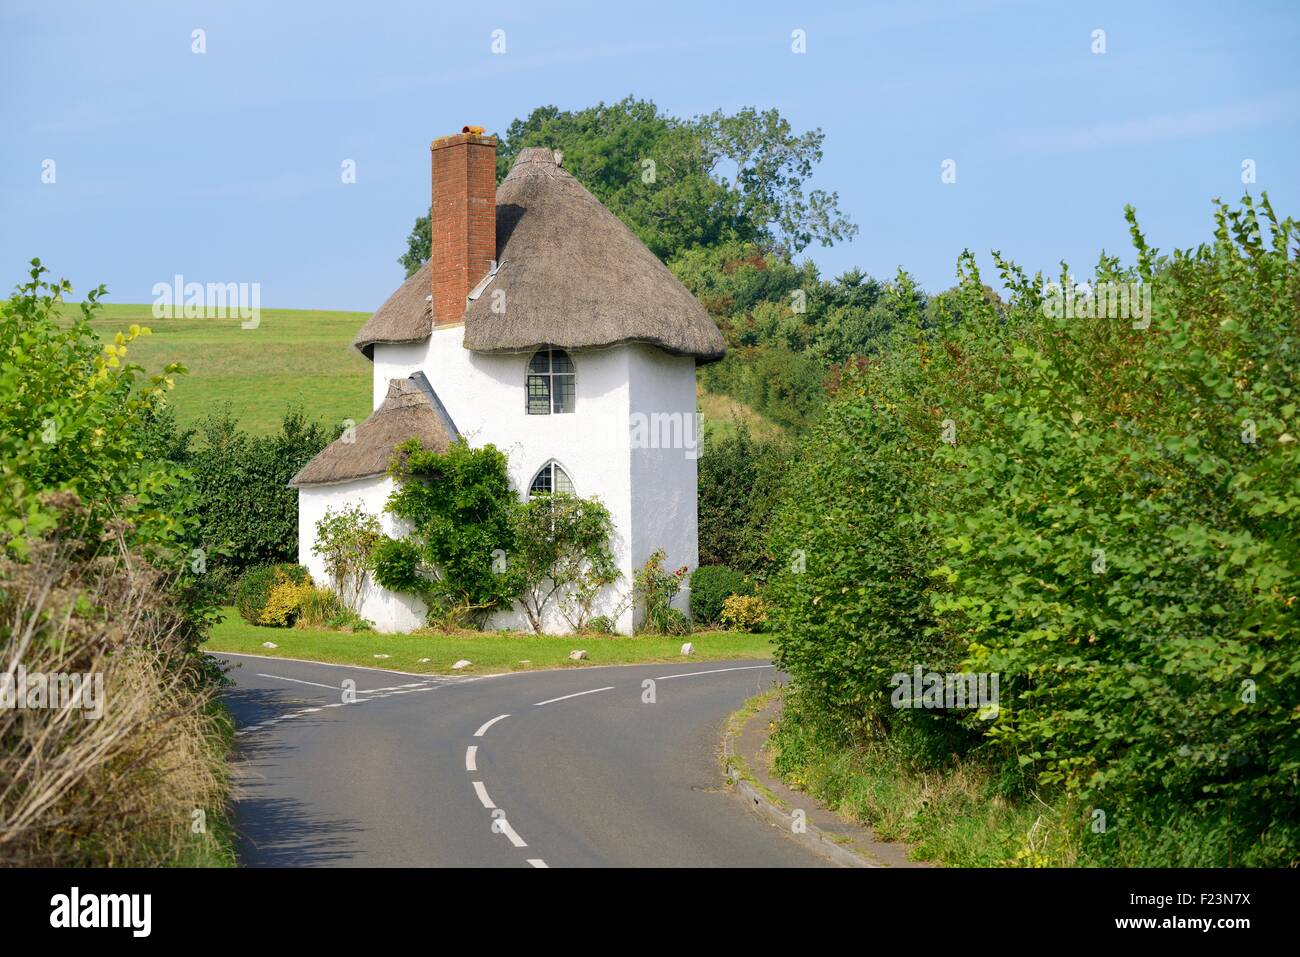 Stanton Drew, Somerset England. The 18th C Old Toll House also known as the Round House on B3130 turnpike road Stock Photo